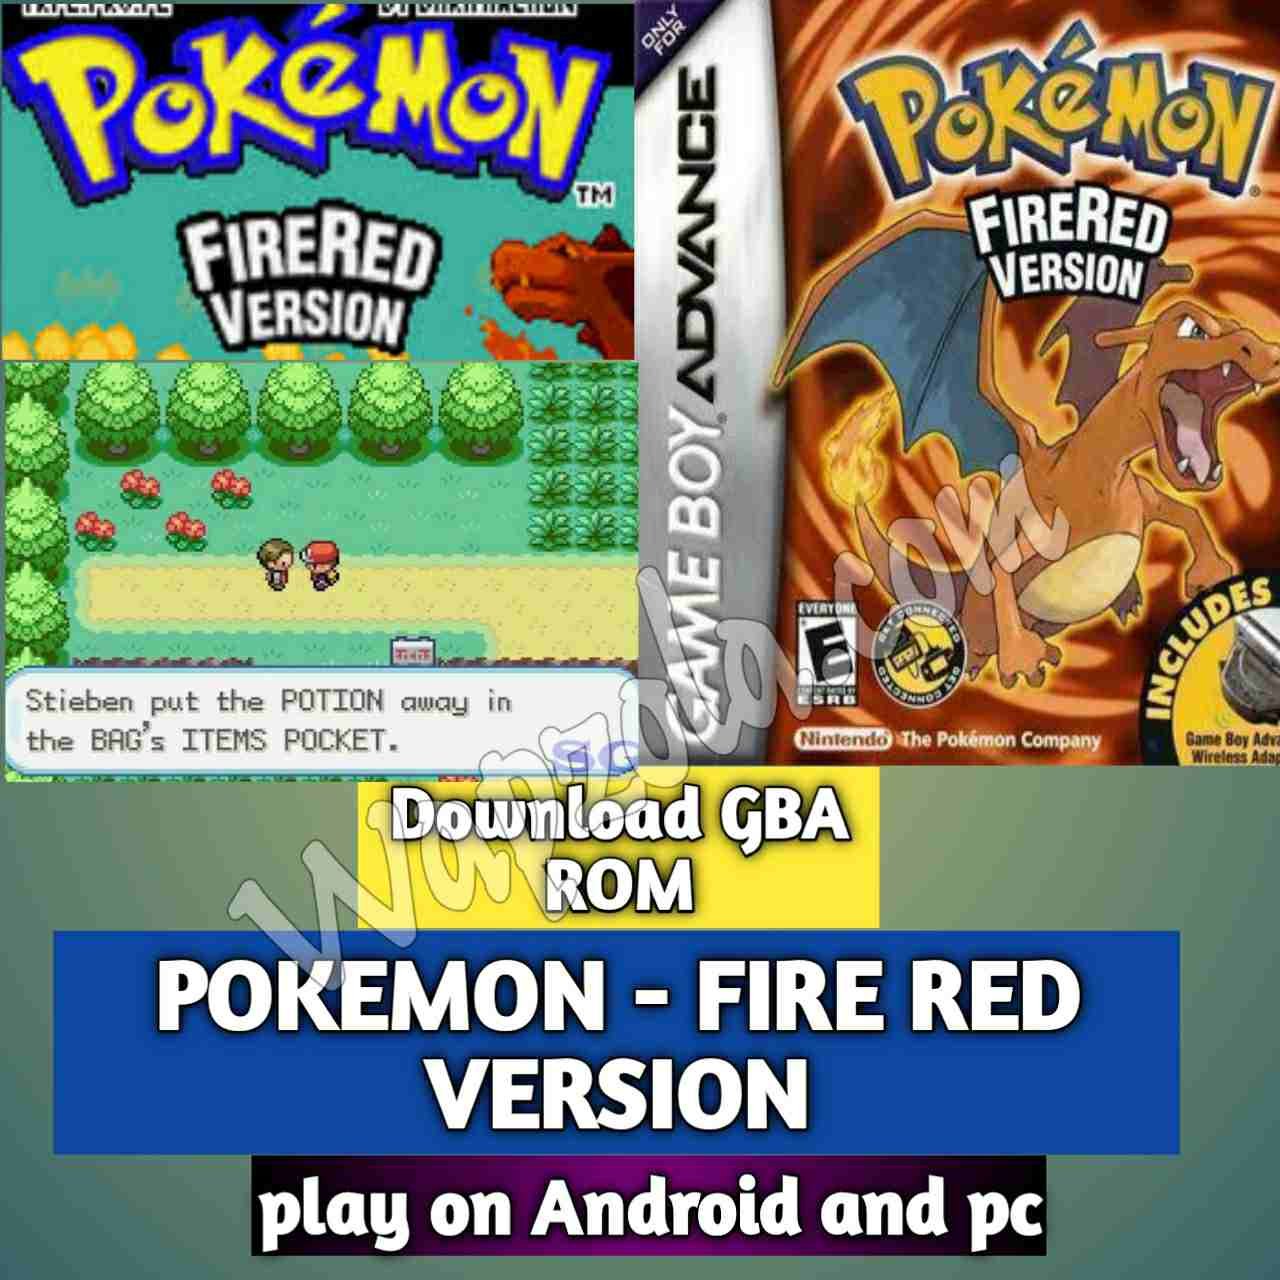 You are currently viewing [Download] POKEMON – FIRE RED VERSION (V1.1) VGBAnext and Visual Boy Advance emulator – GBA APK ROM Zip and Save Files play Android and pc